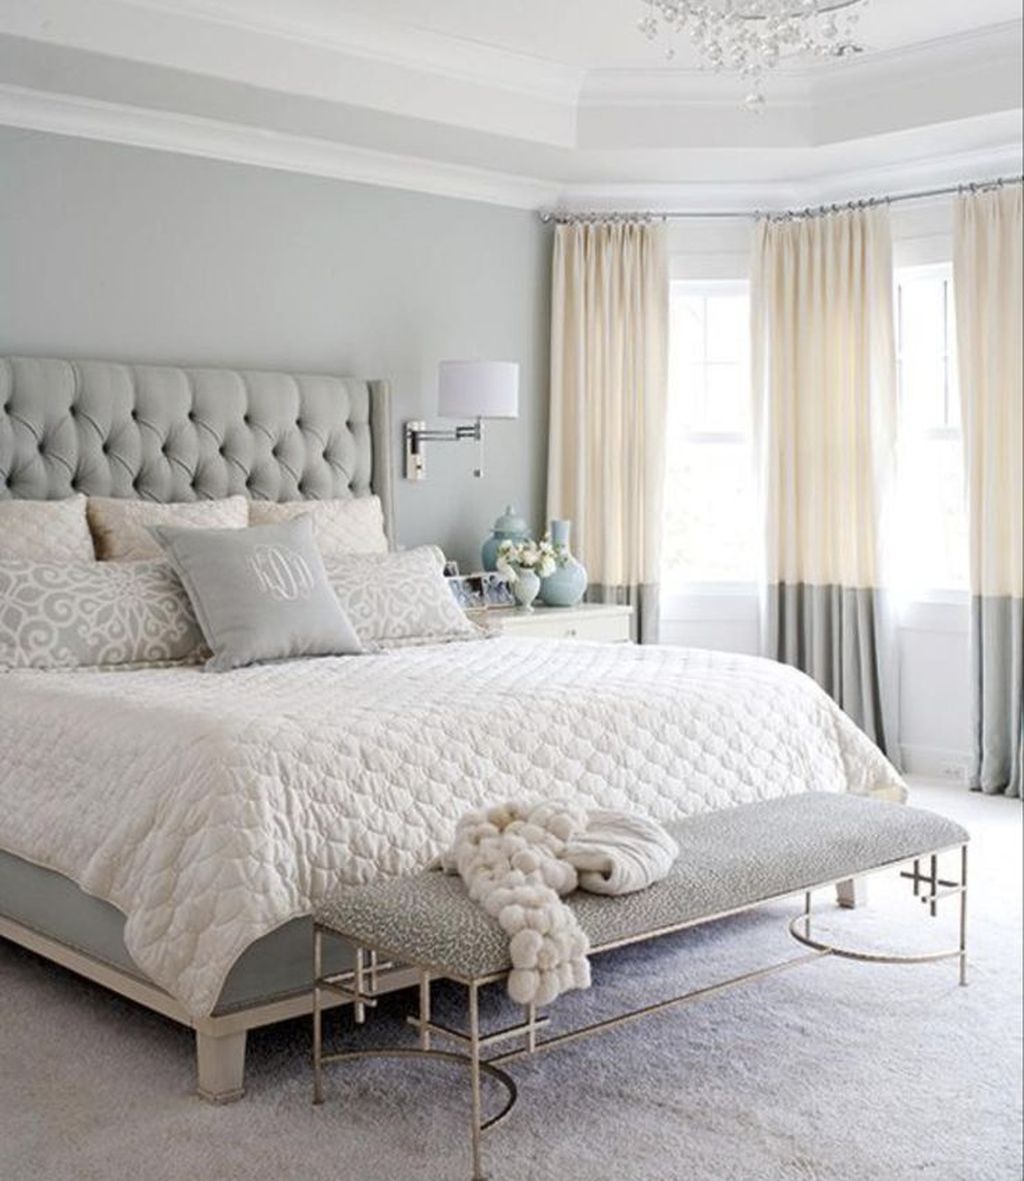 33 The Best White Master Bedroom Design And Decoration Ideas - HOMYHOMEE